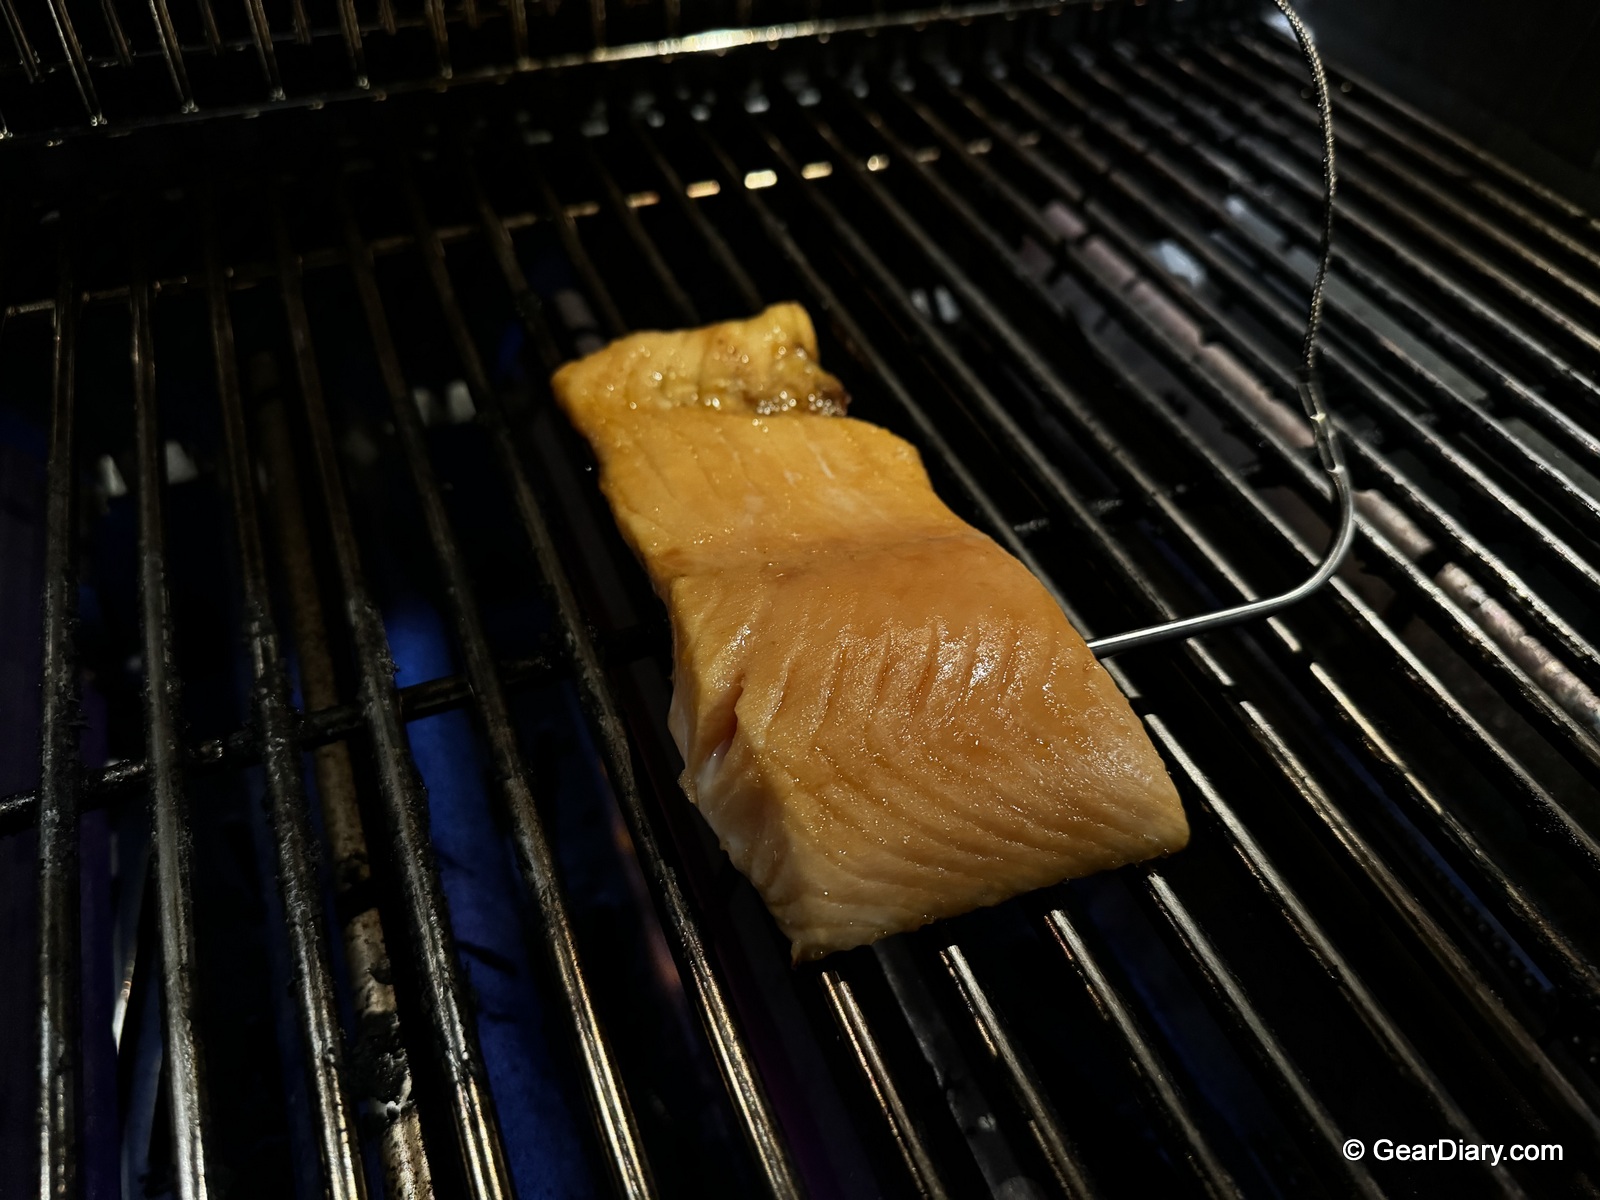 Weber Genesis SPX-435 Smart Gas Grill Review: All the Bells and Whistles You Could Ask for!